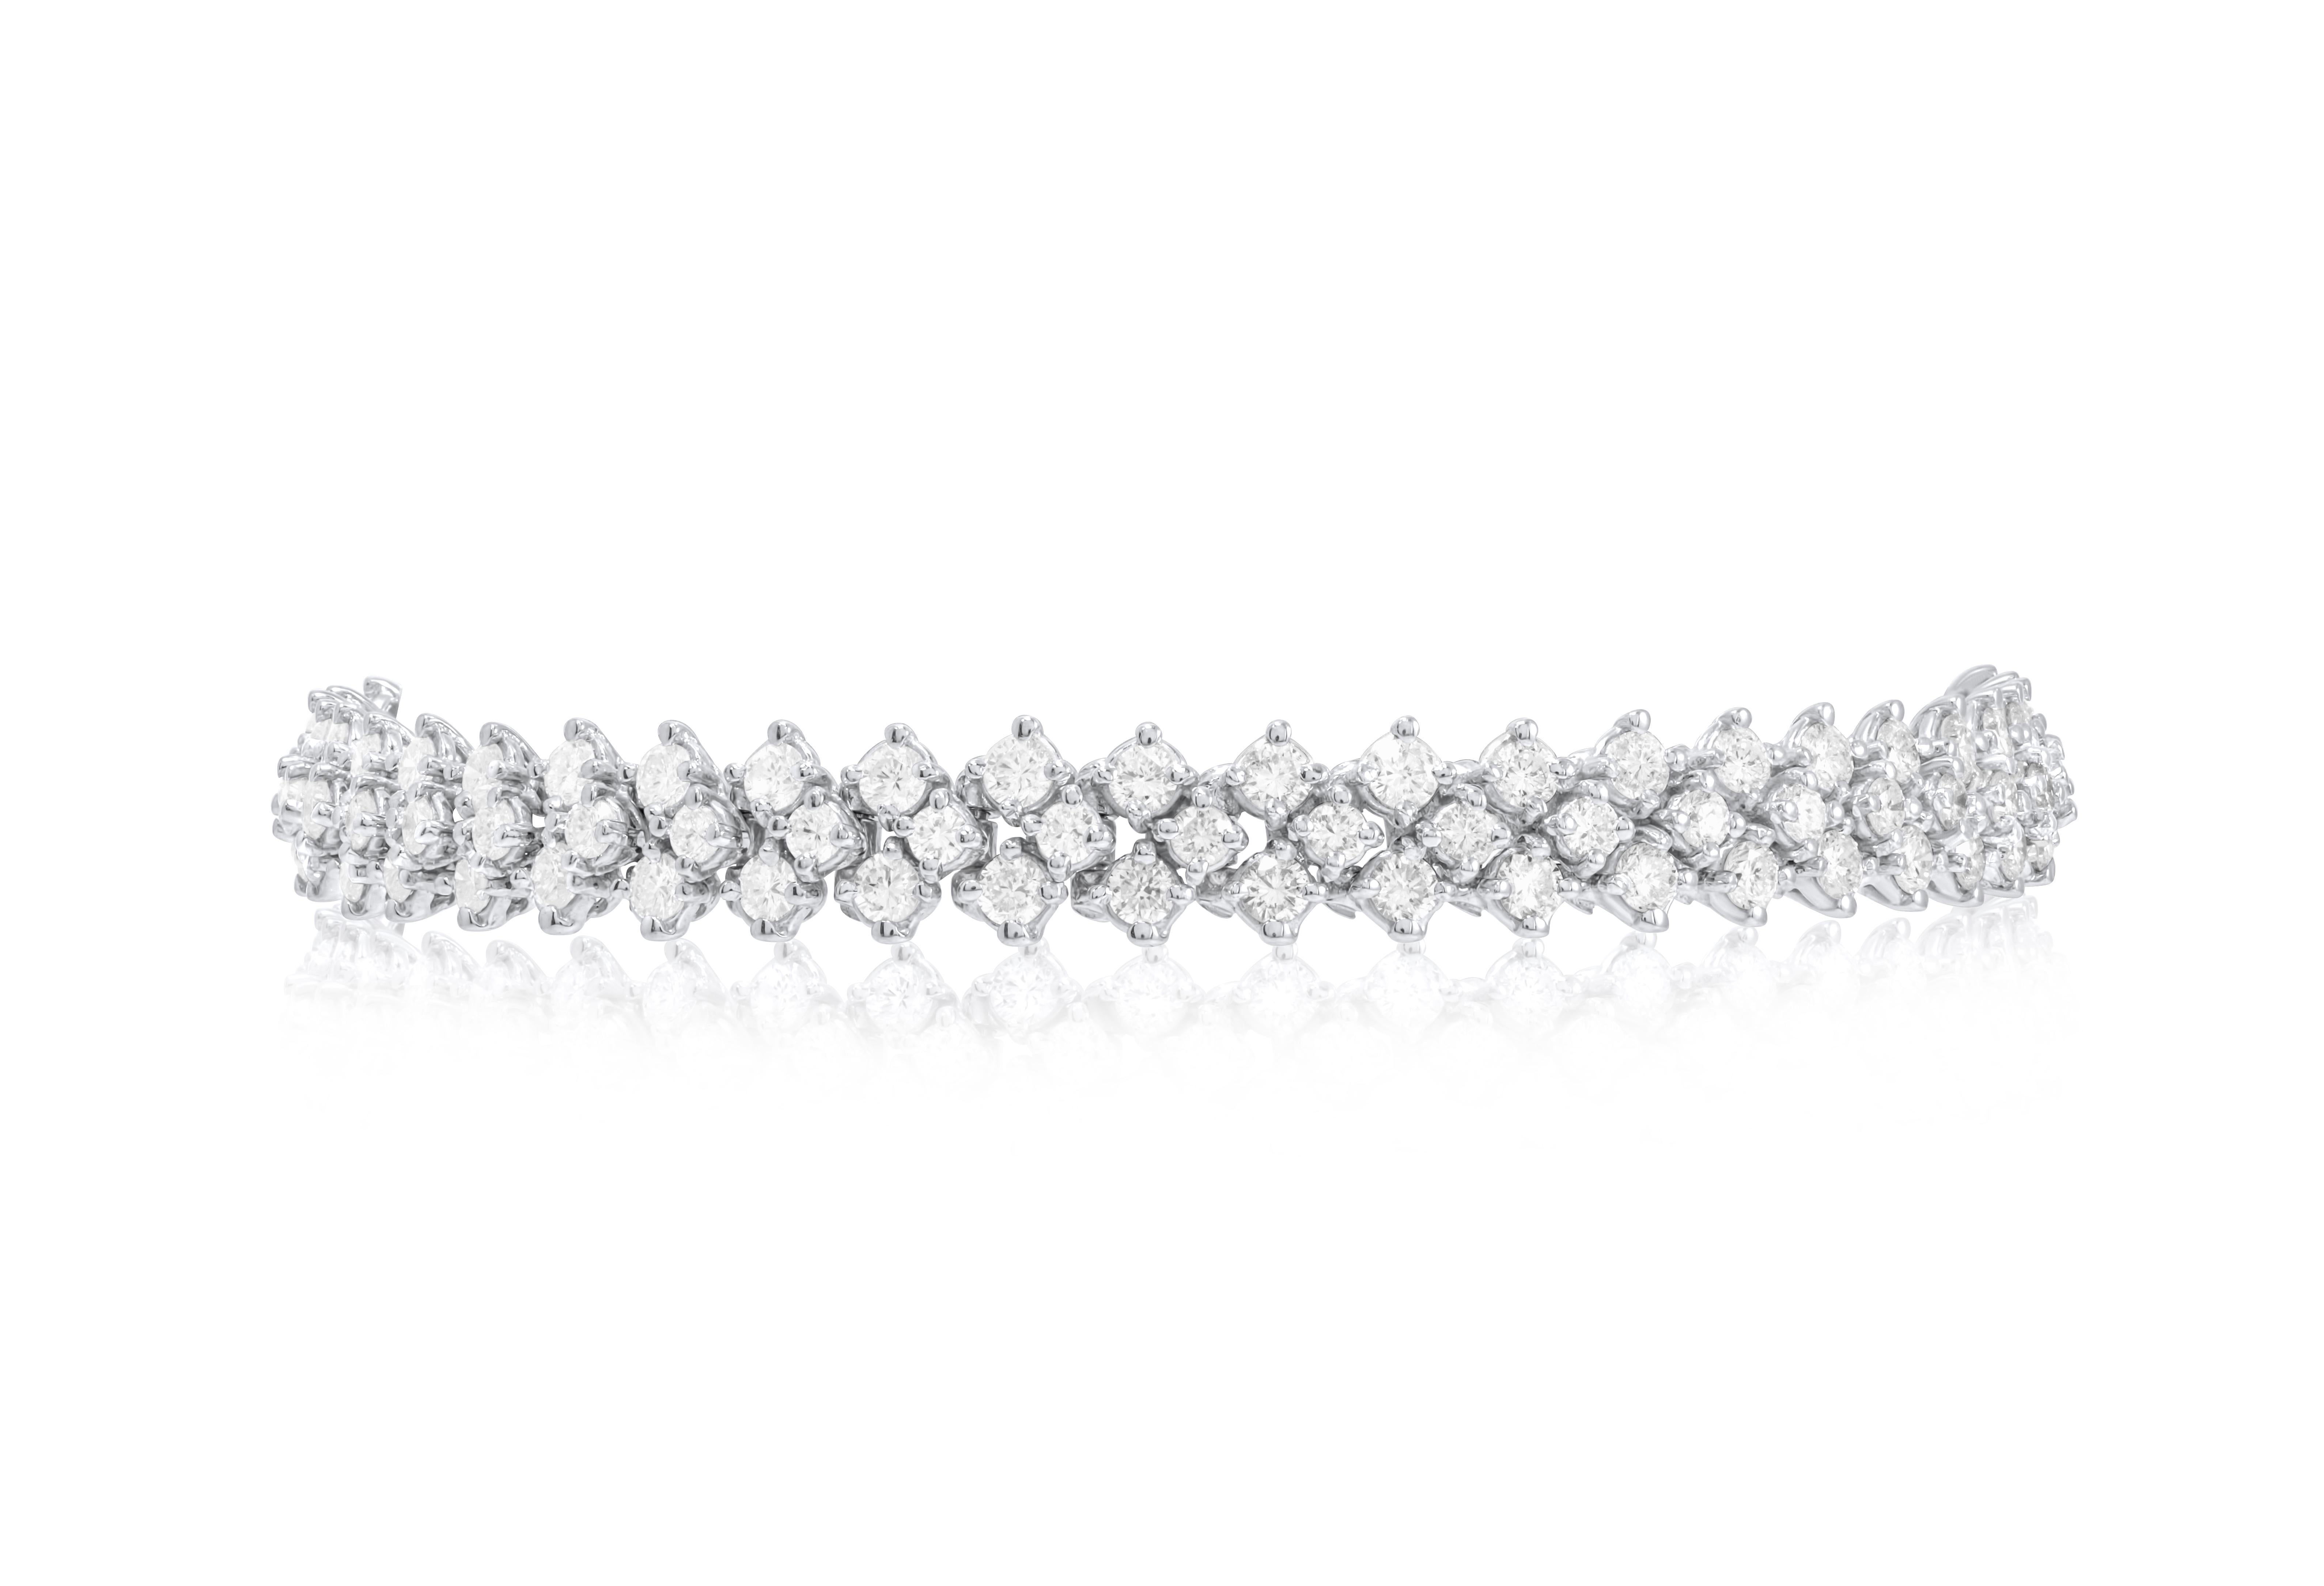 Brilliant Cut Diana M. 18kt white gold fashion bracelet featuring 3 rows of 9.00 cts diamonds For Sale